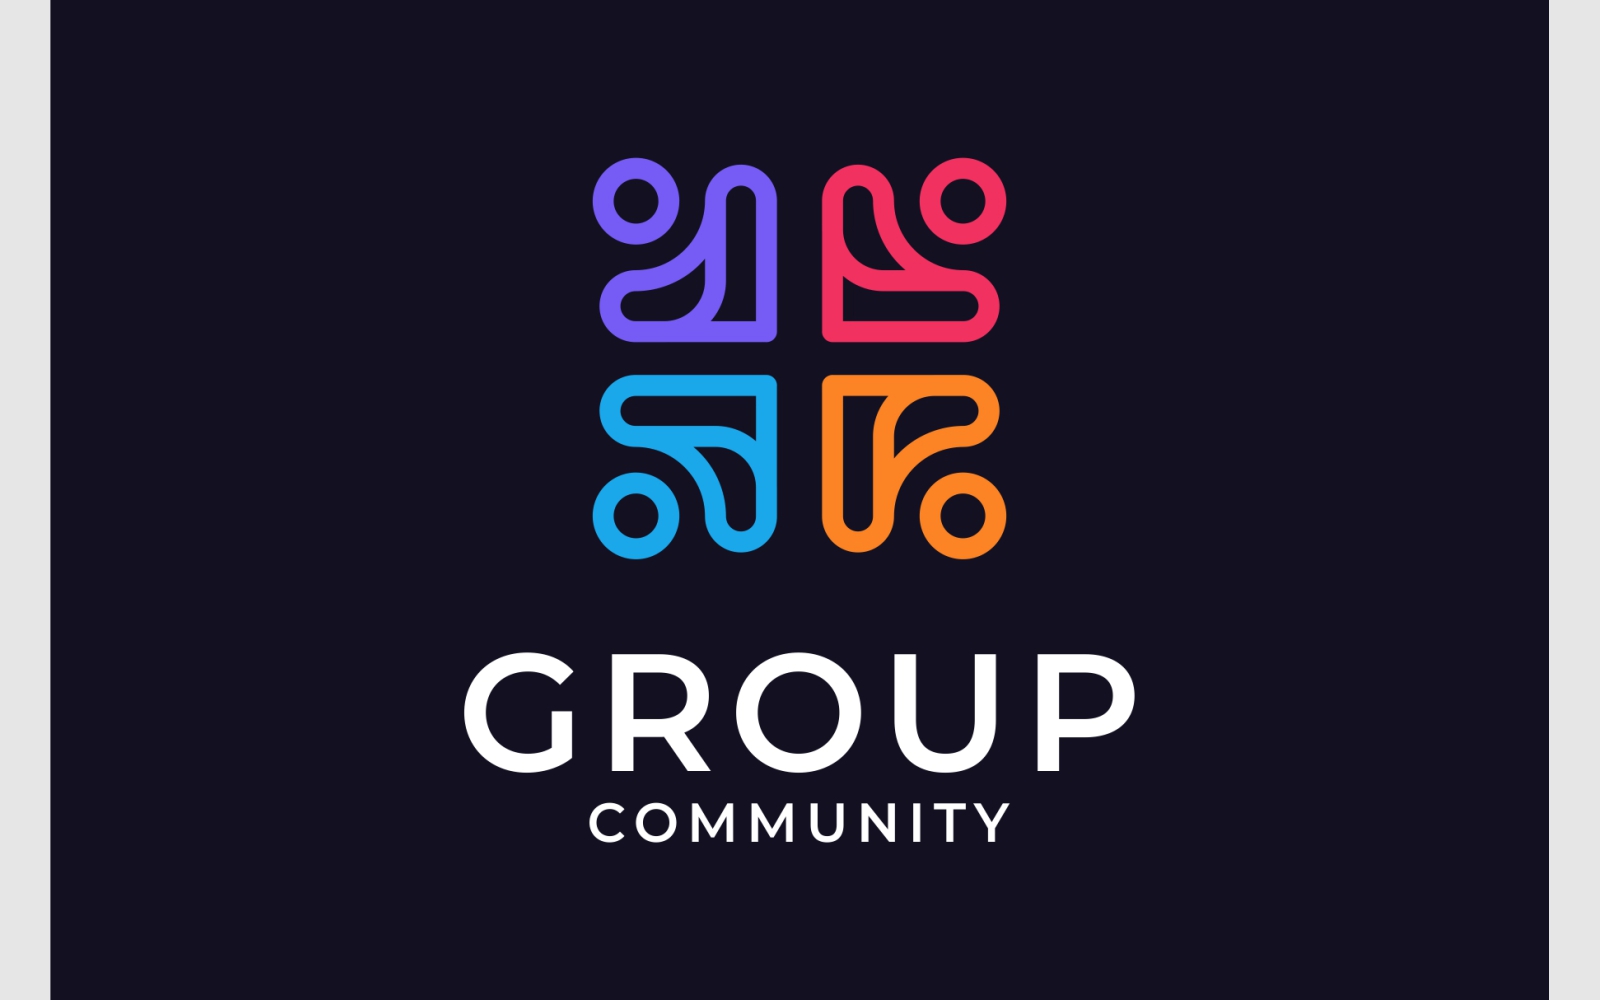 Abstract Group People Community Logo